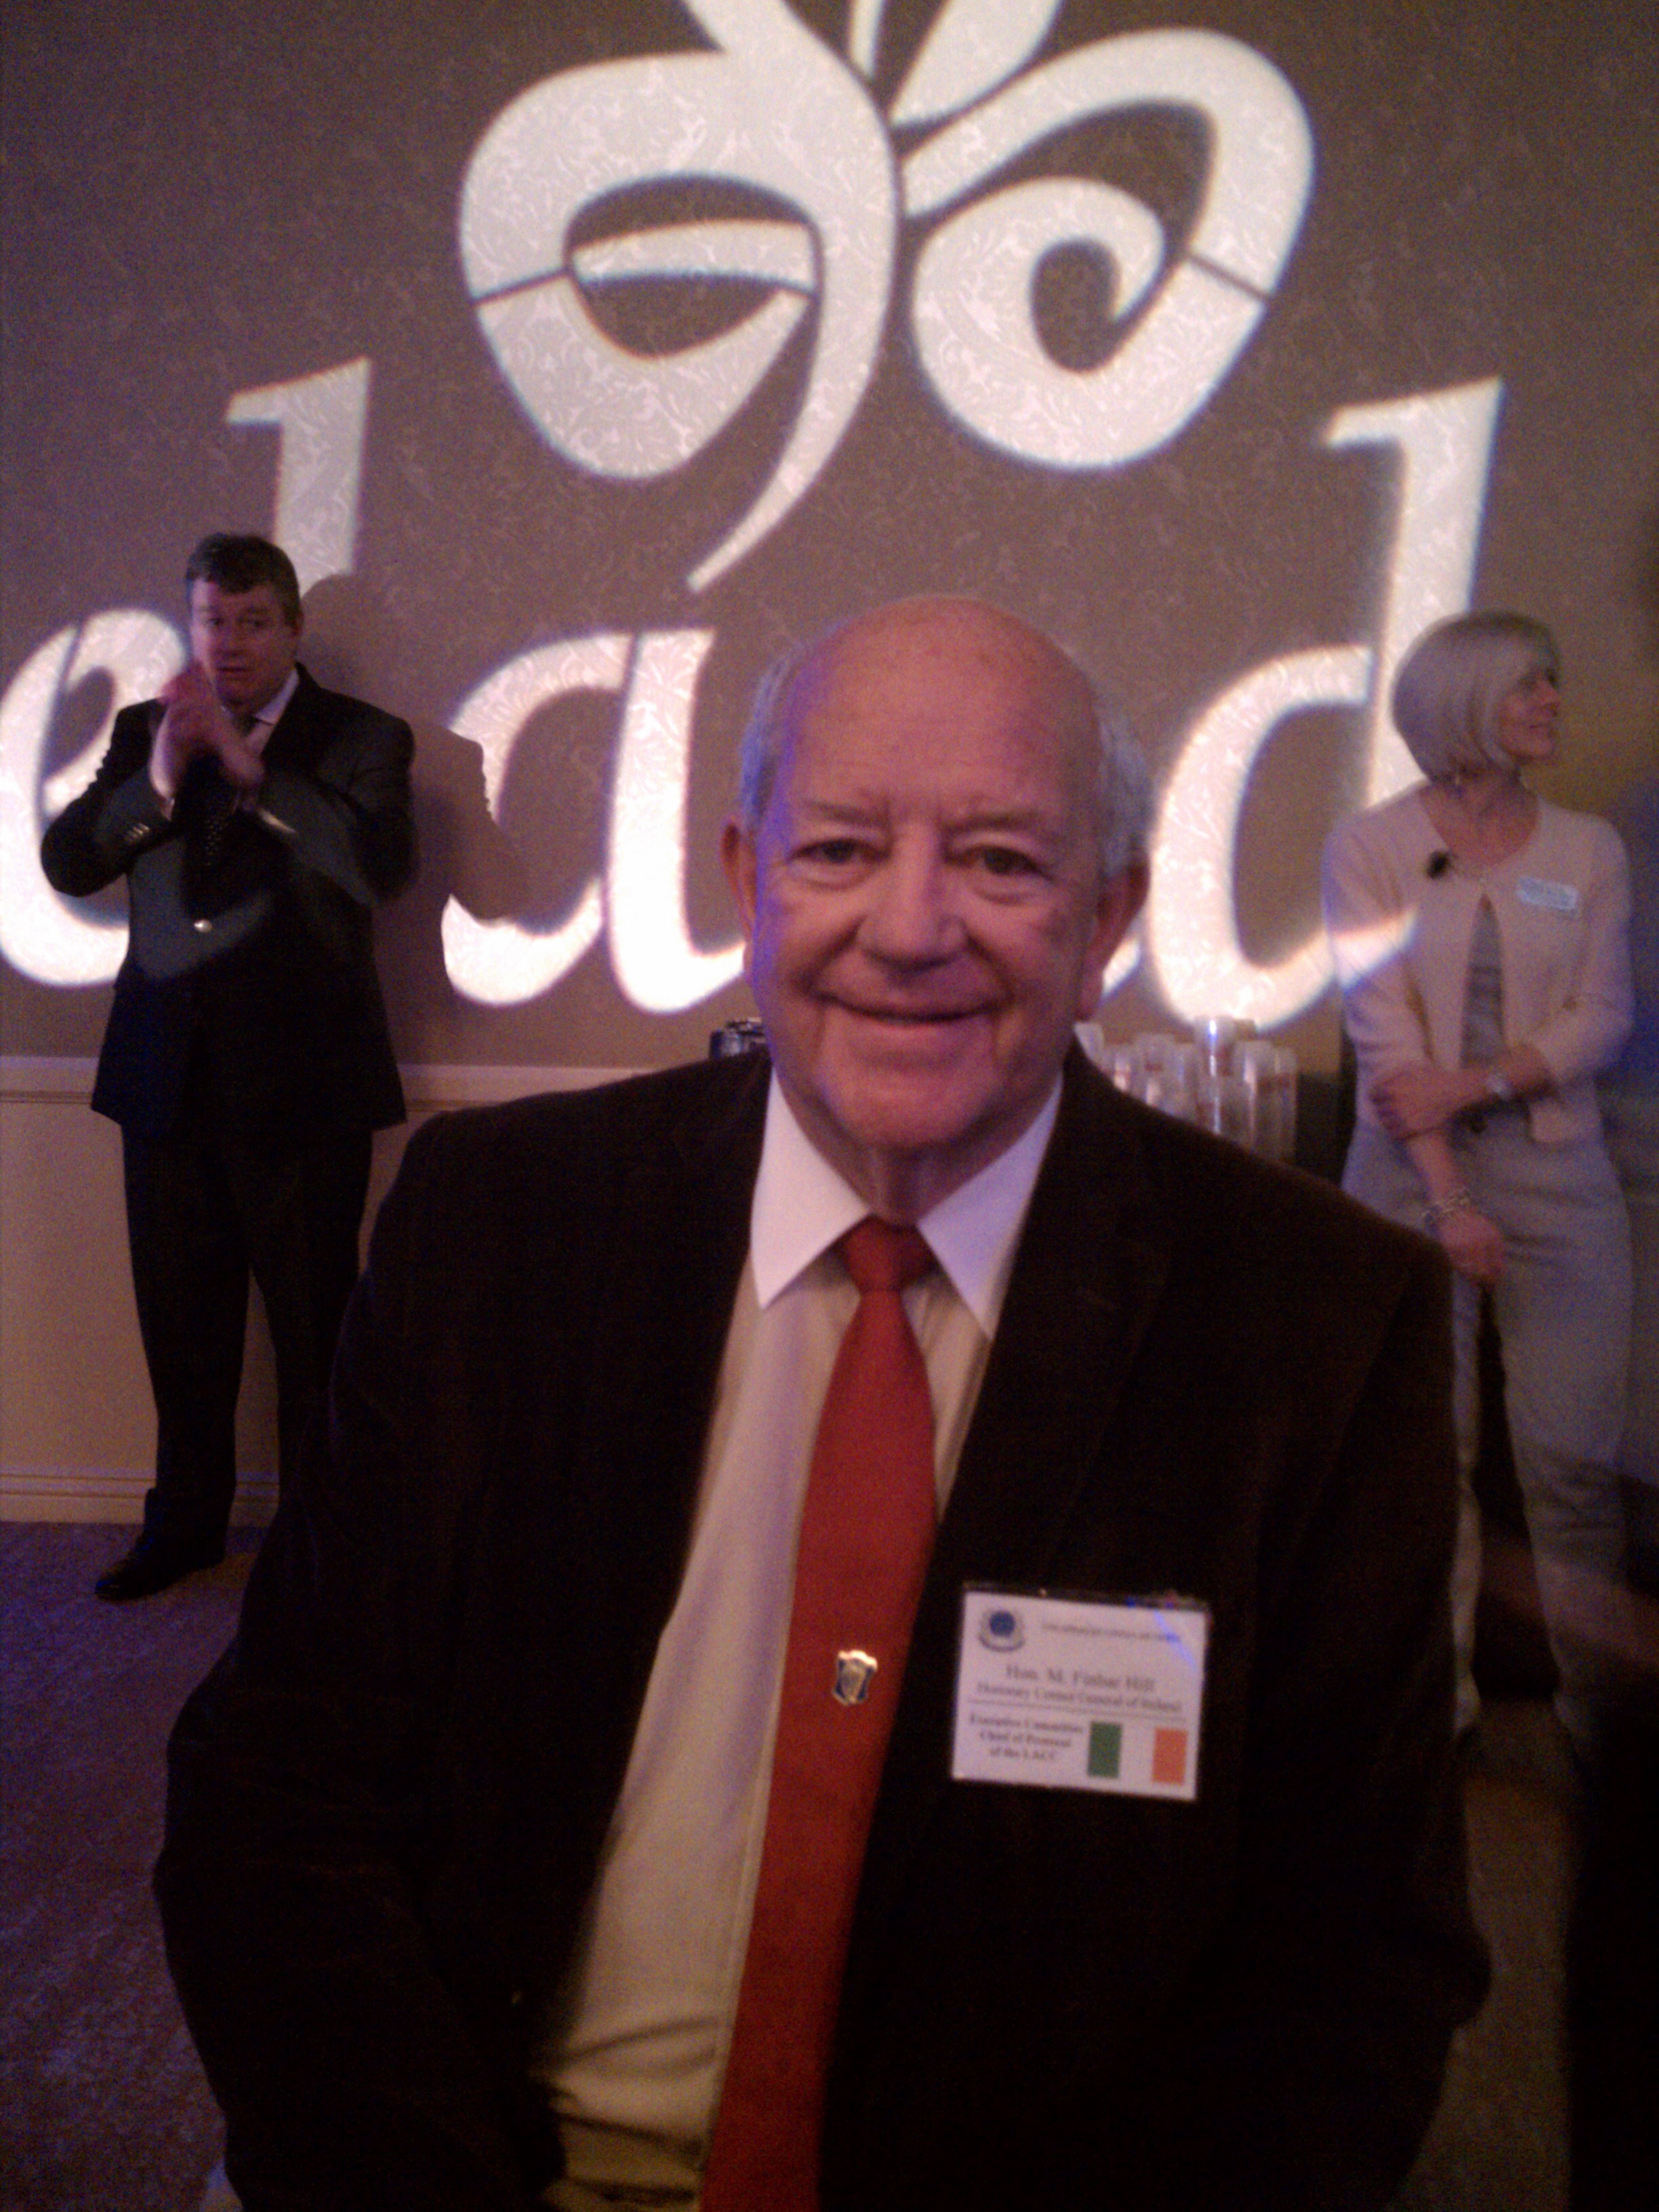 M. Finbar Hill, the honorary Consul General of Ireland and Chief of Protocol of the Los Angeles Consular Corps at the Tourism Ireland Beverly Hilton event. Photo by Vida Ghaffari